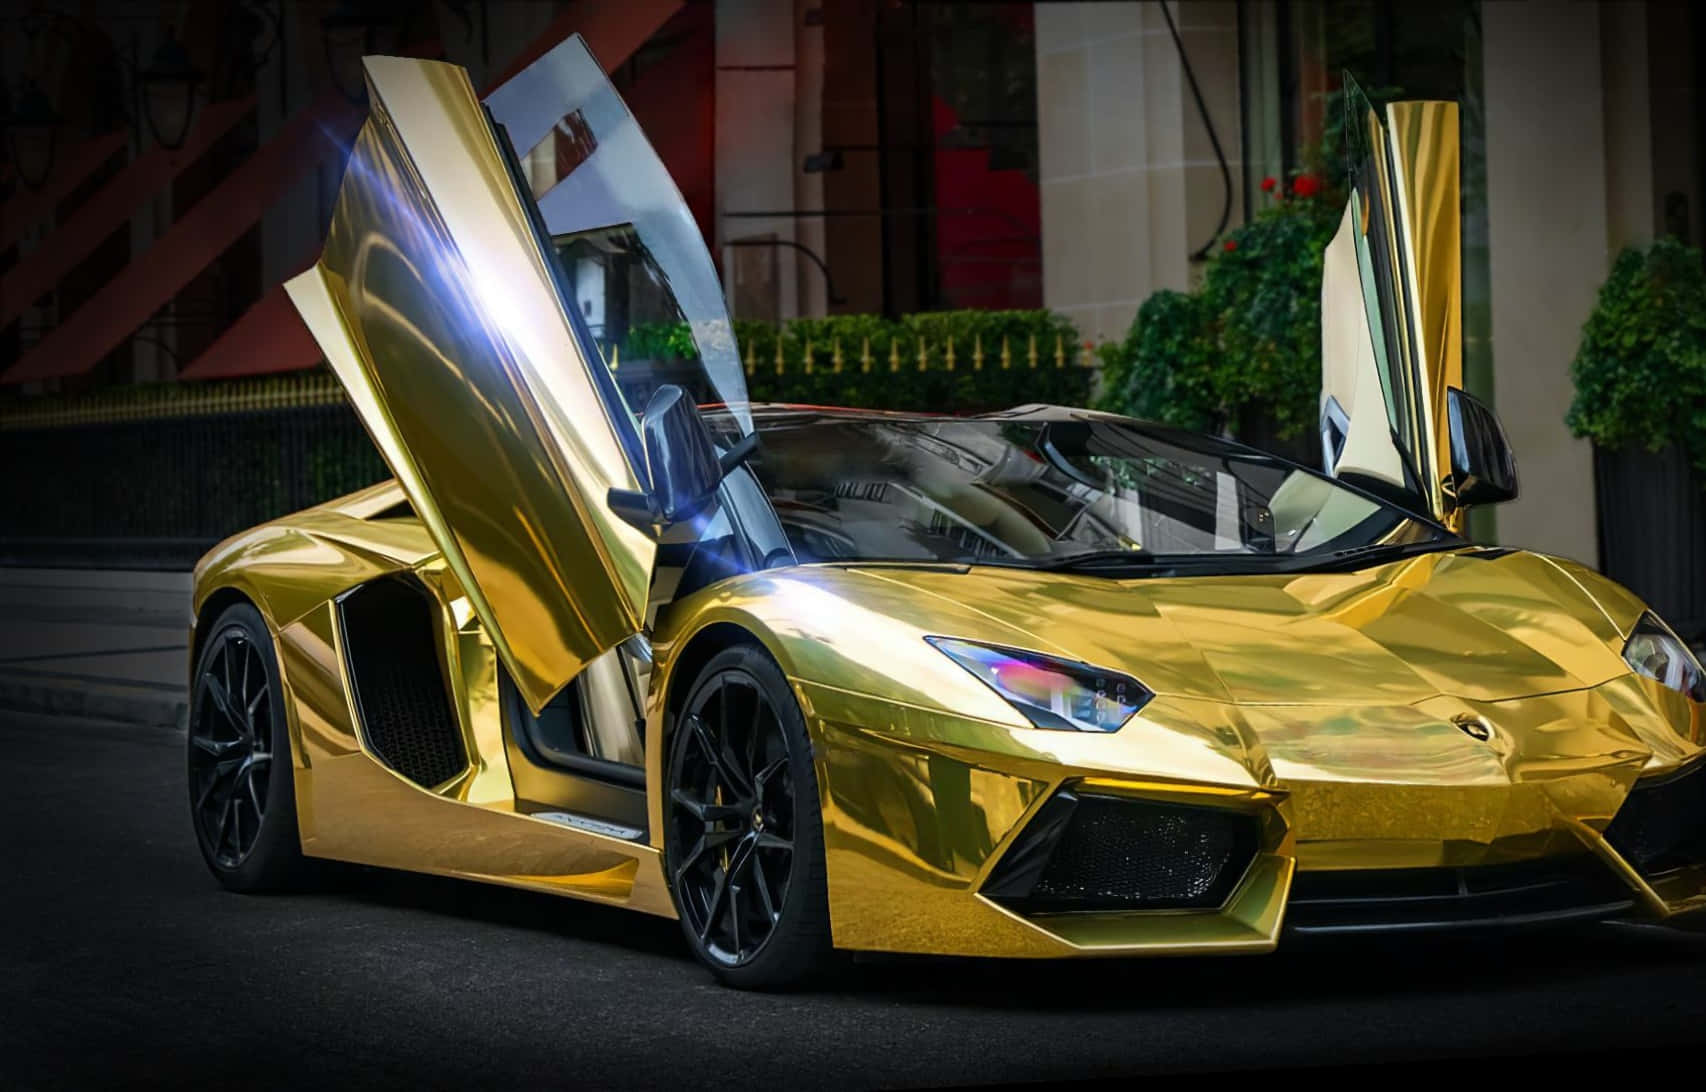 A Gold Sports Car With Its Doors Open